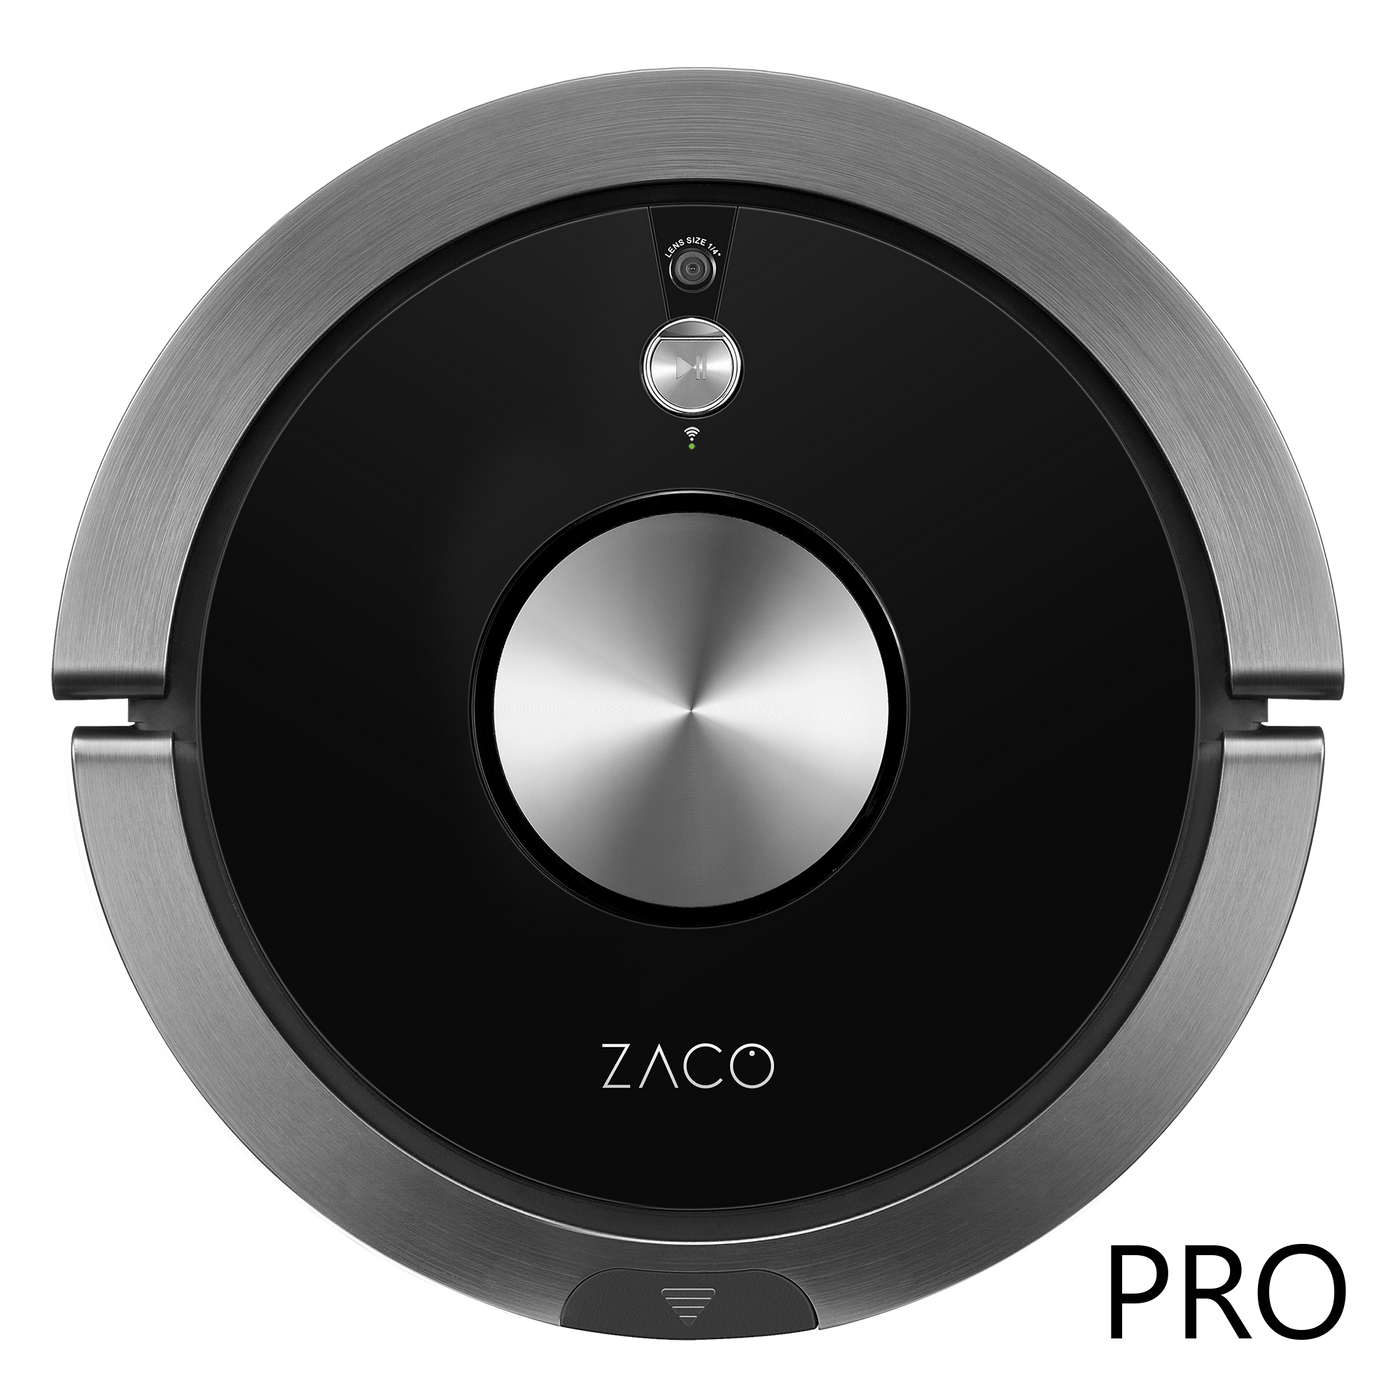 ZACO A9sPro vacuuming and mopping robot